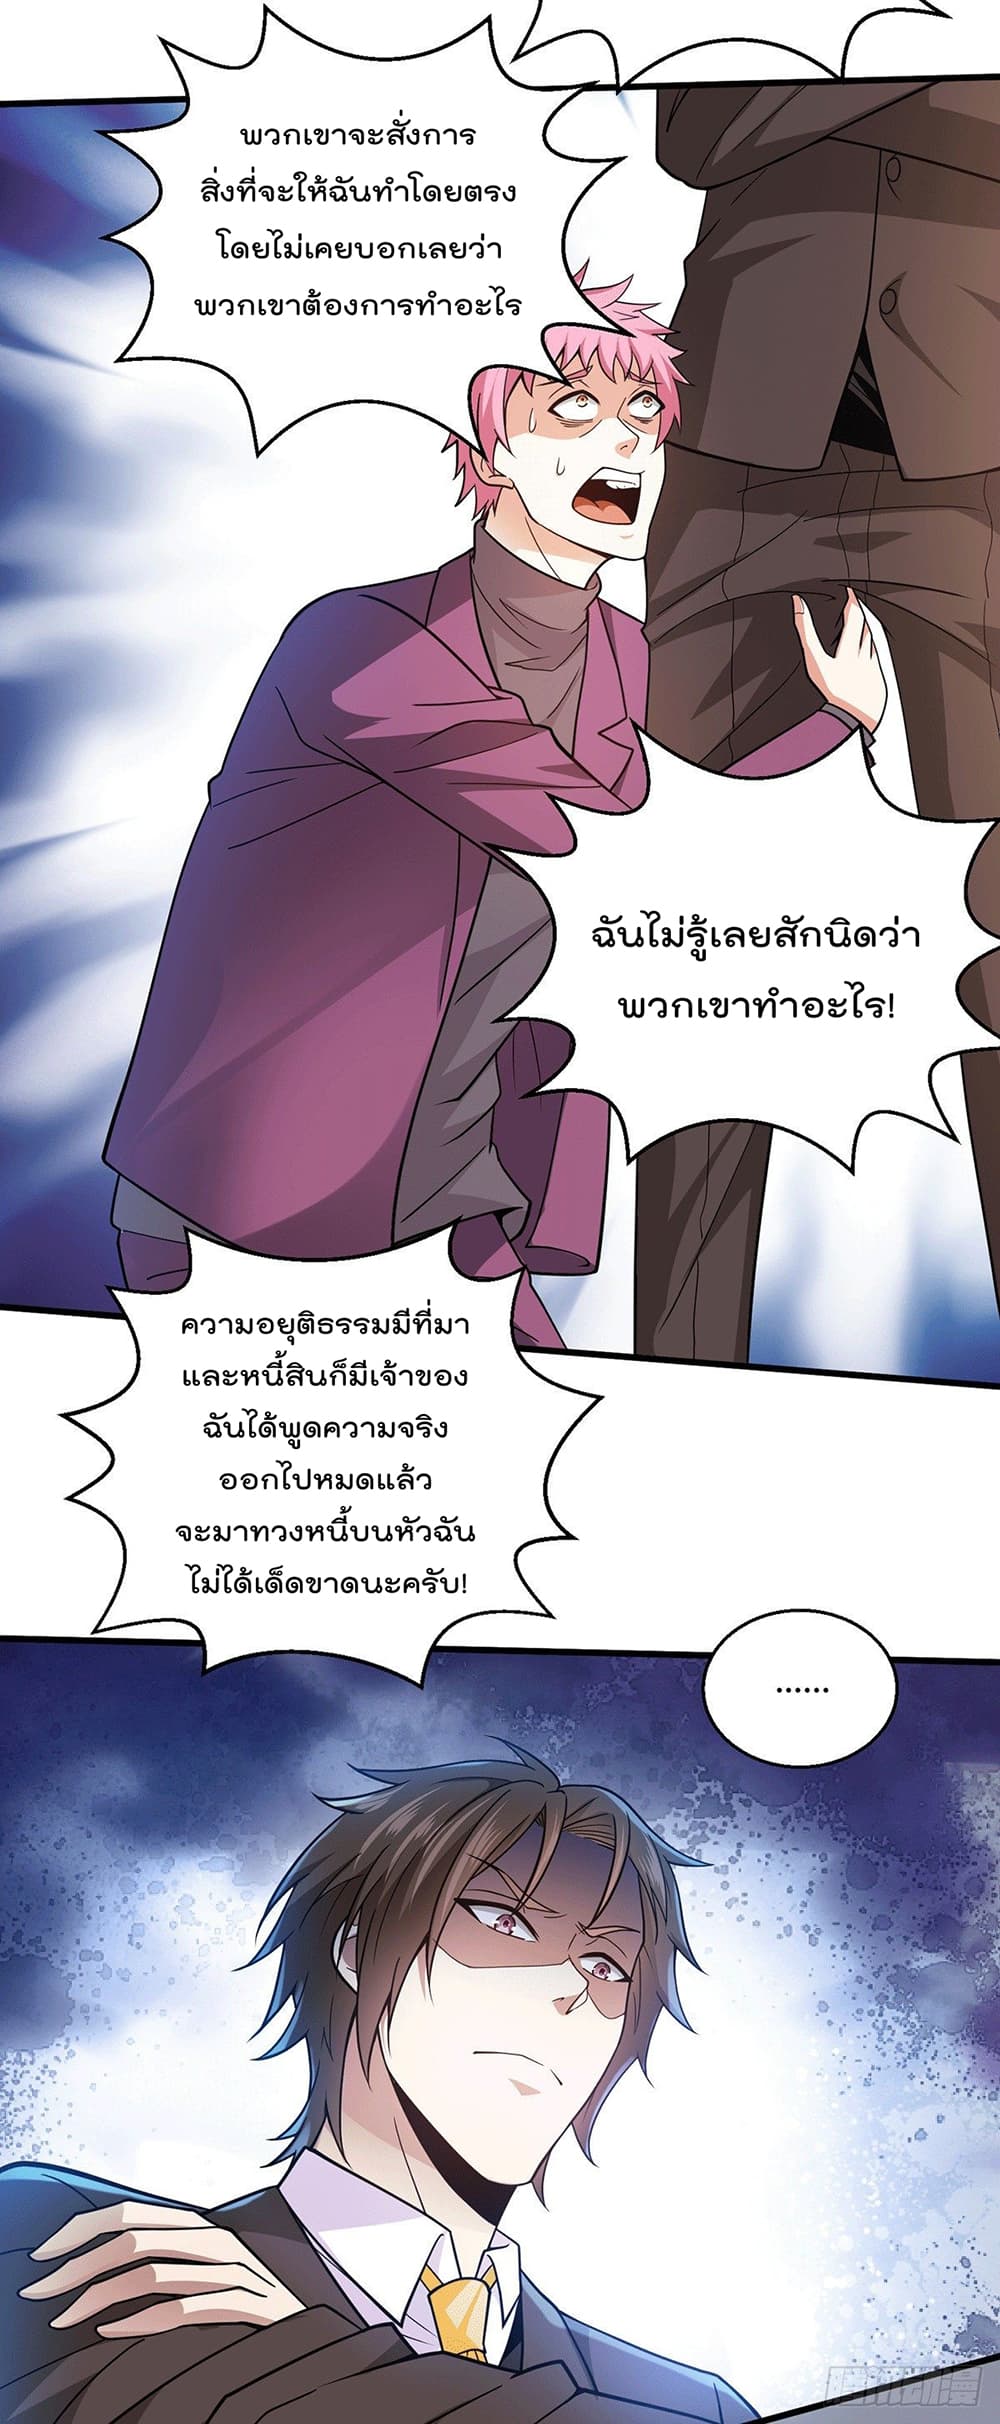 God Dragon of War in The City 49 (21)